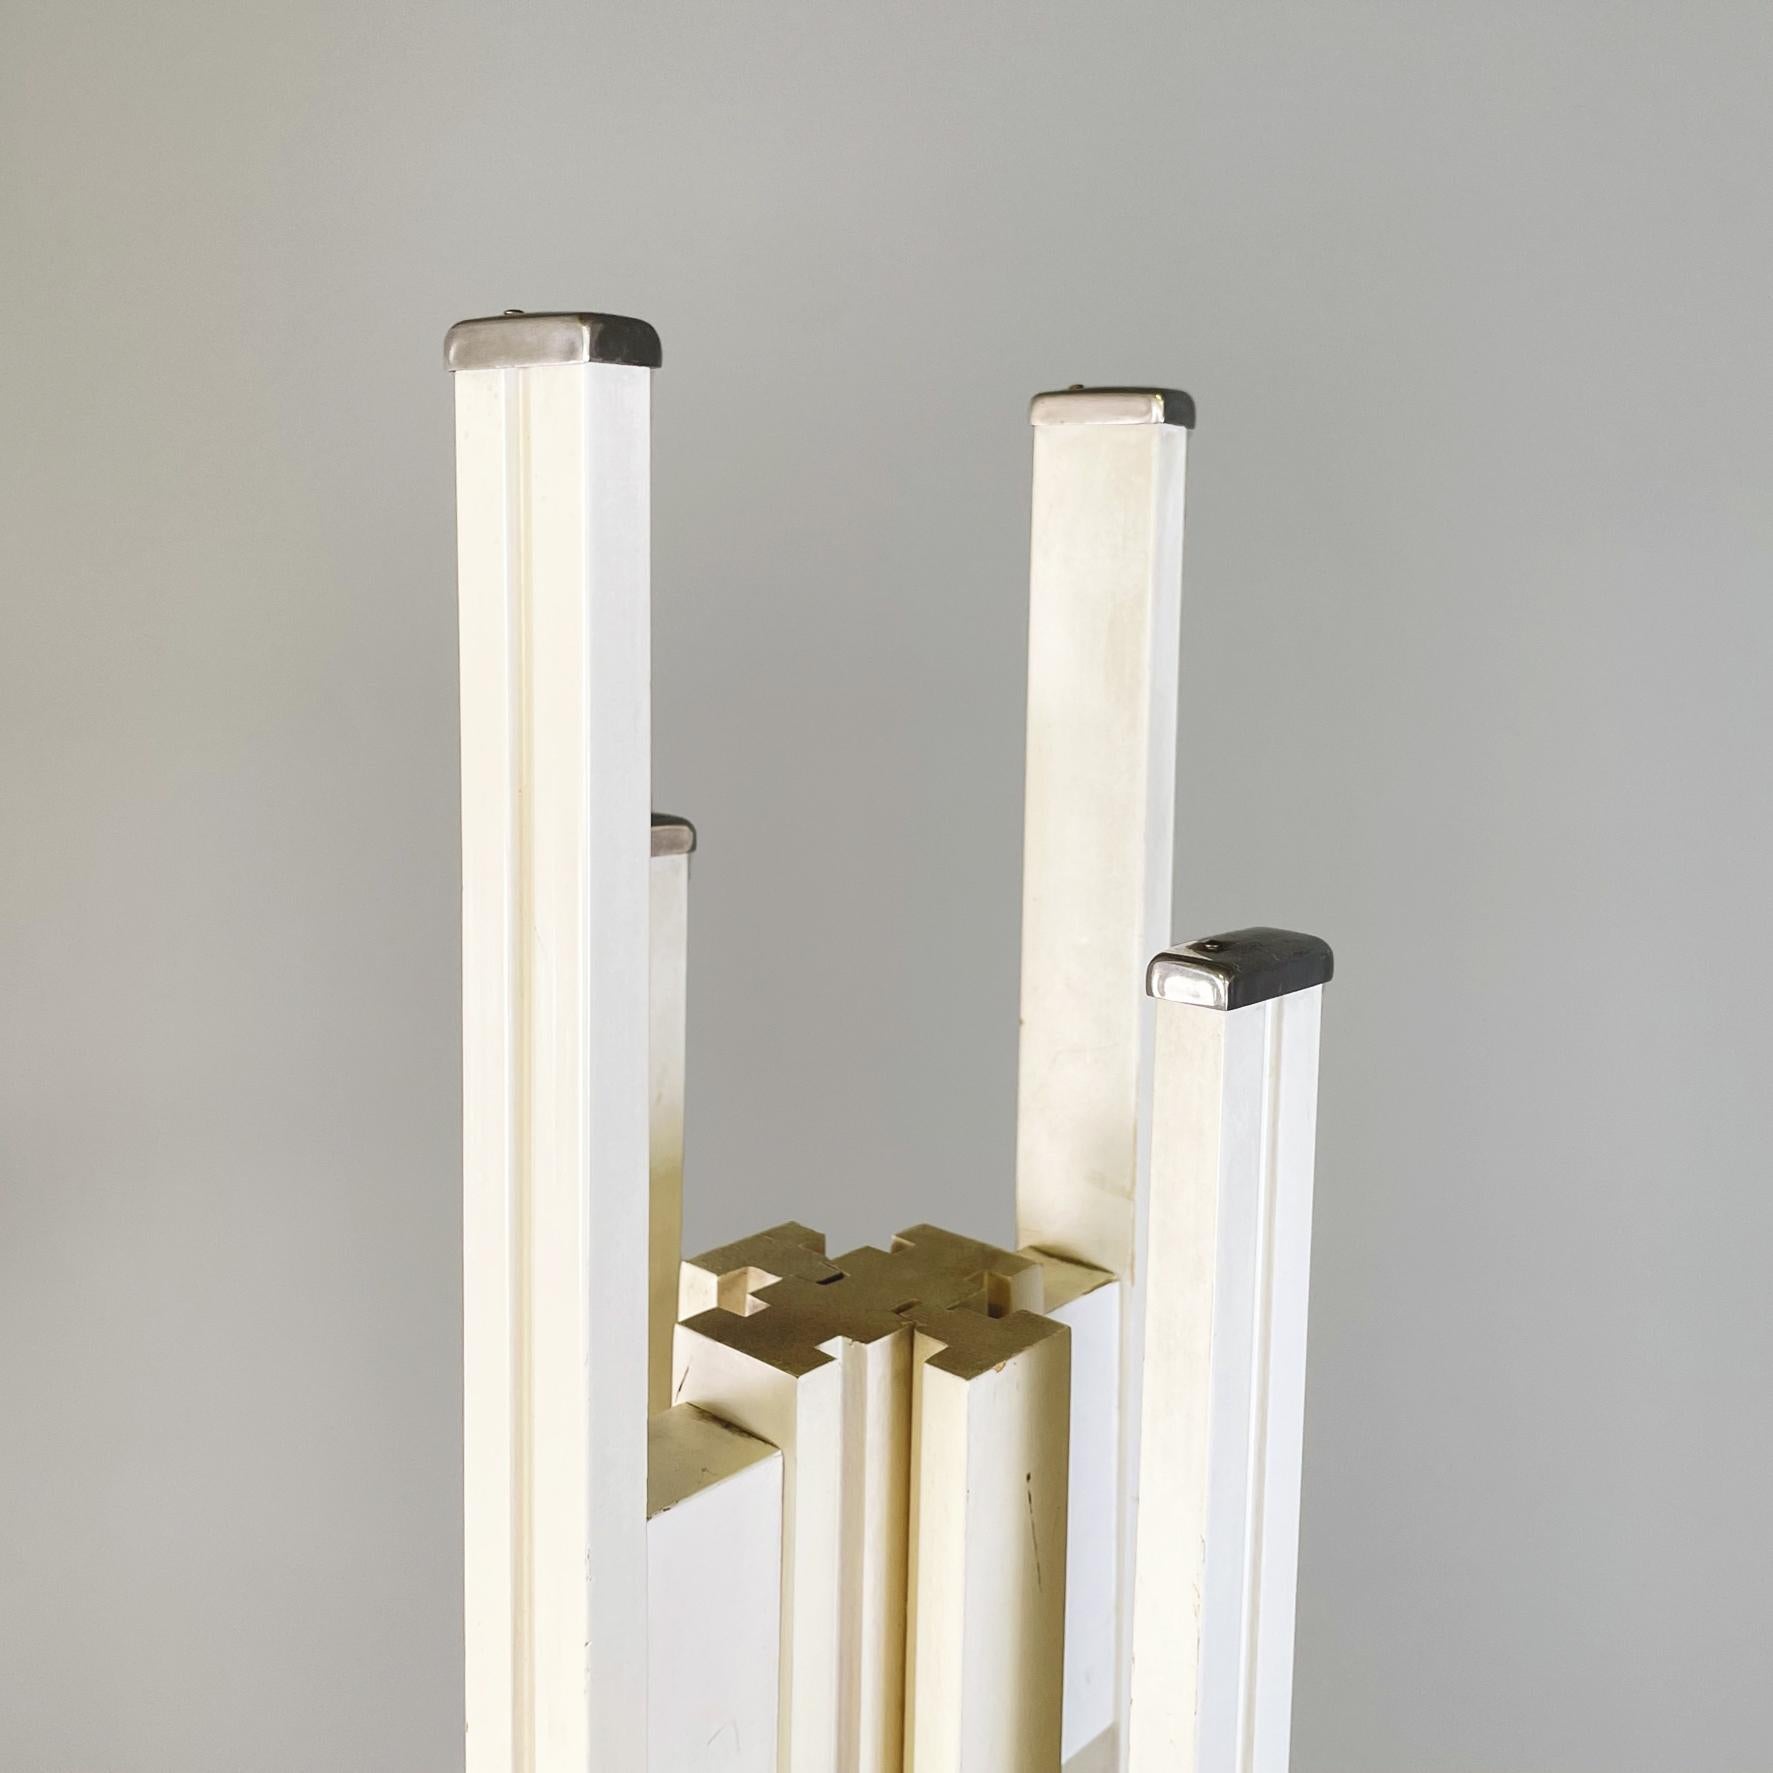 Mid-20th Century Italian Midcentury White Wood Metal Coat Stand by Carlo de Carli for Fiarm, 1960 For Sale